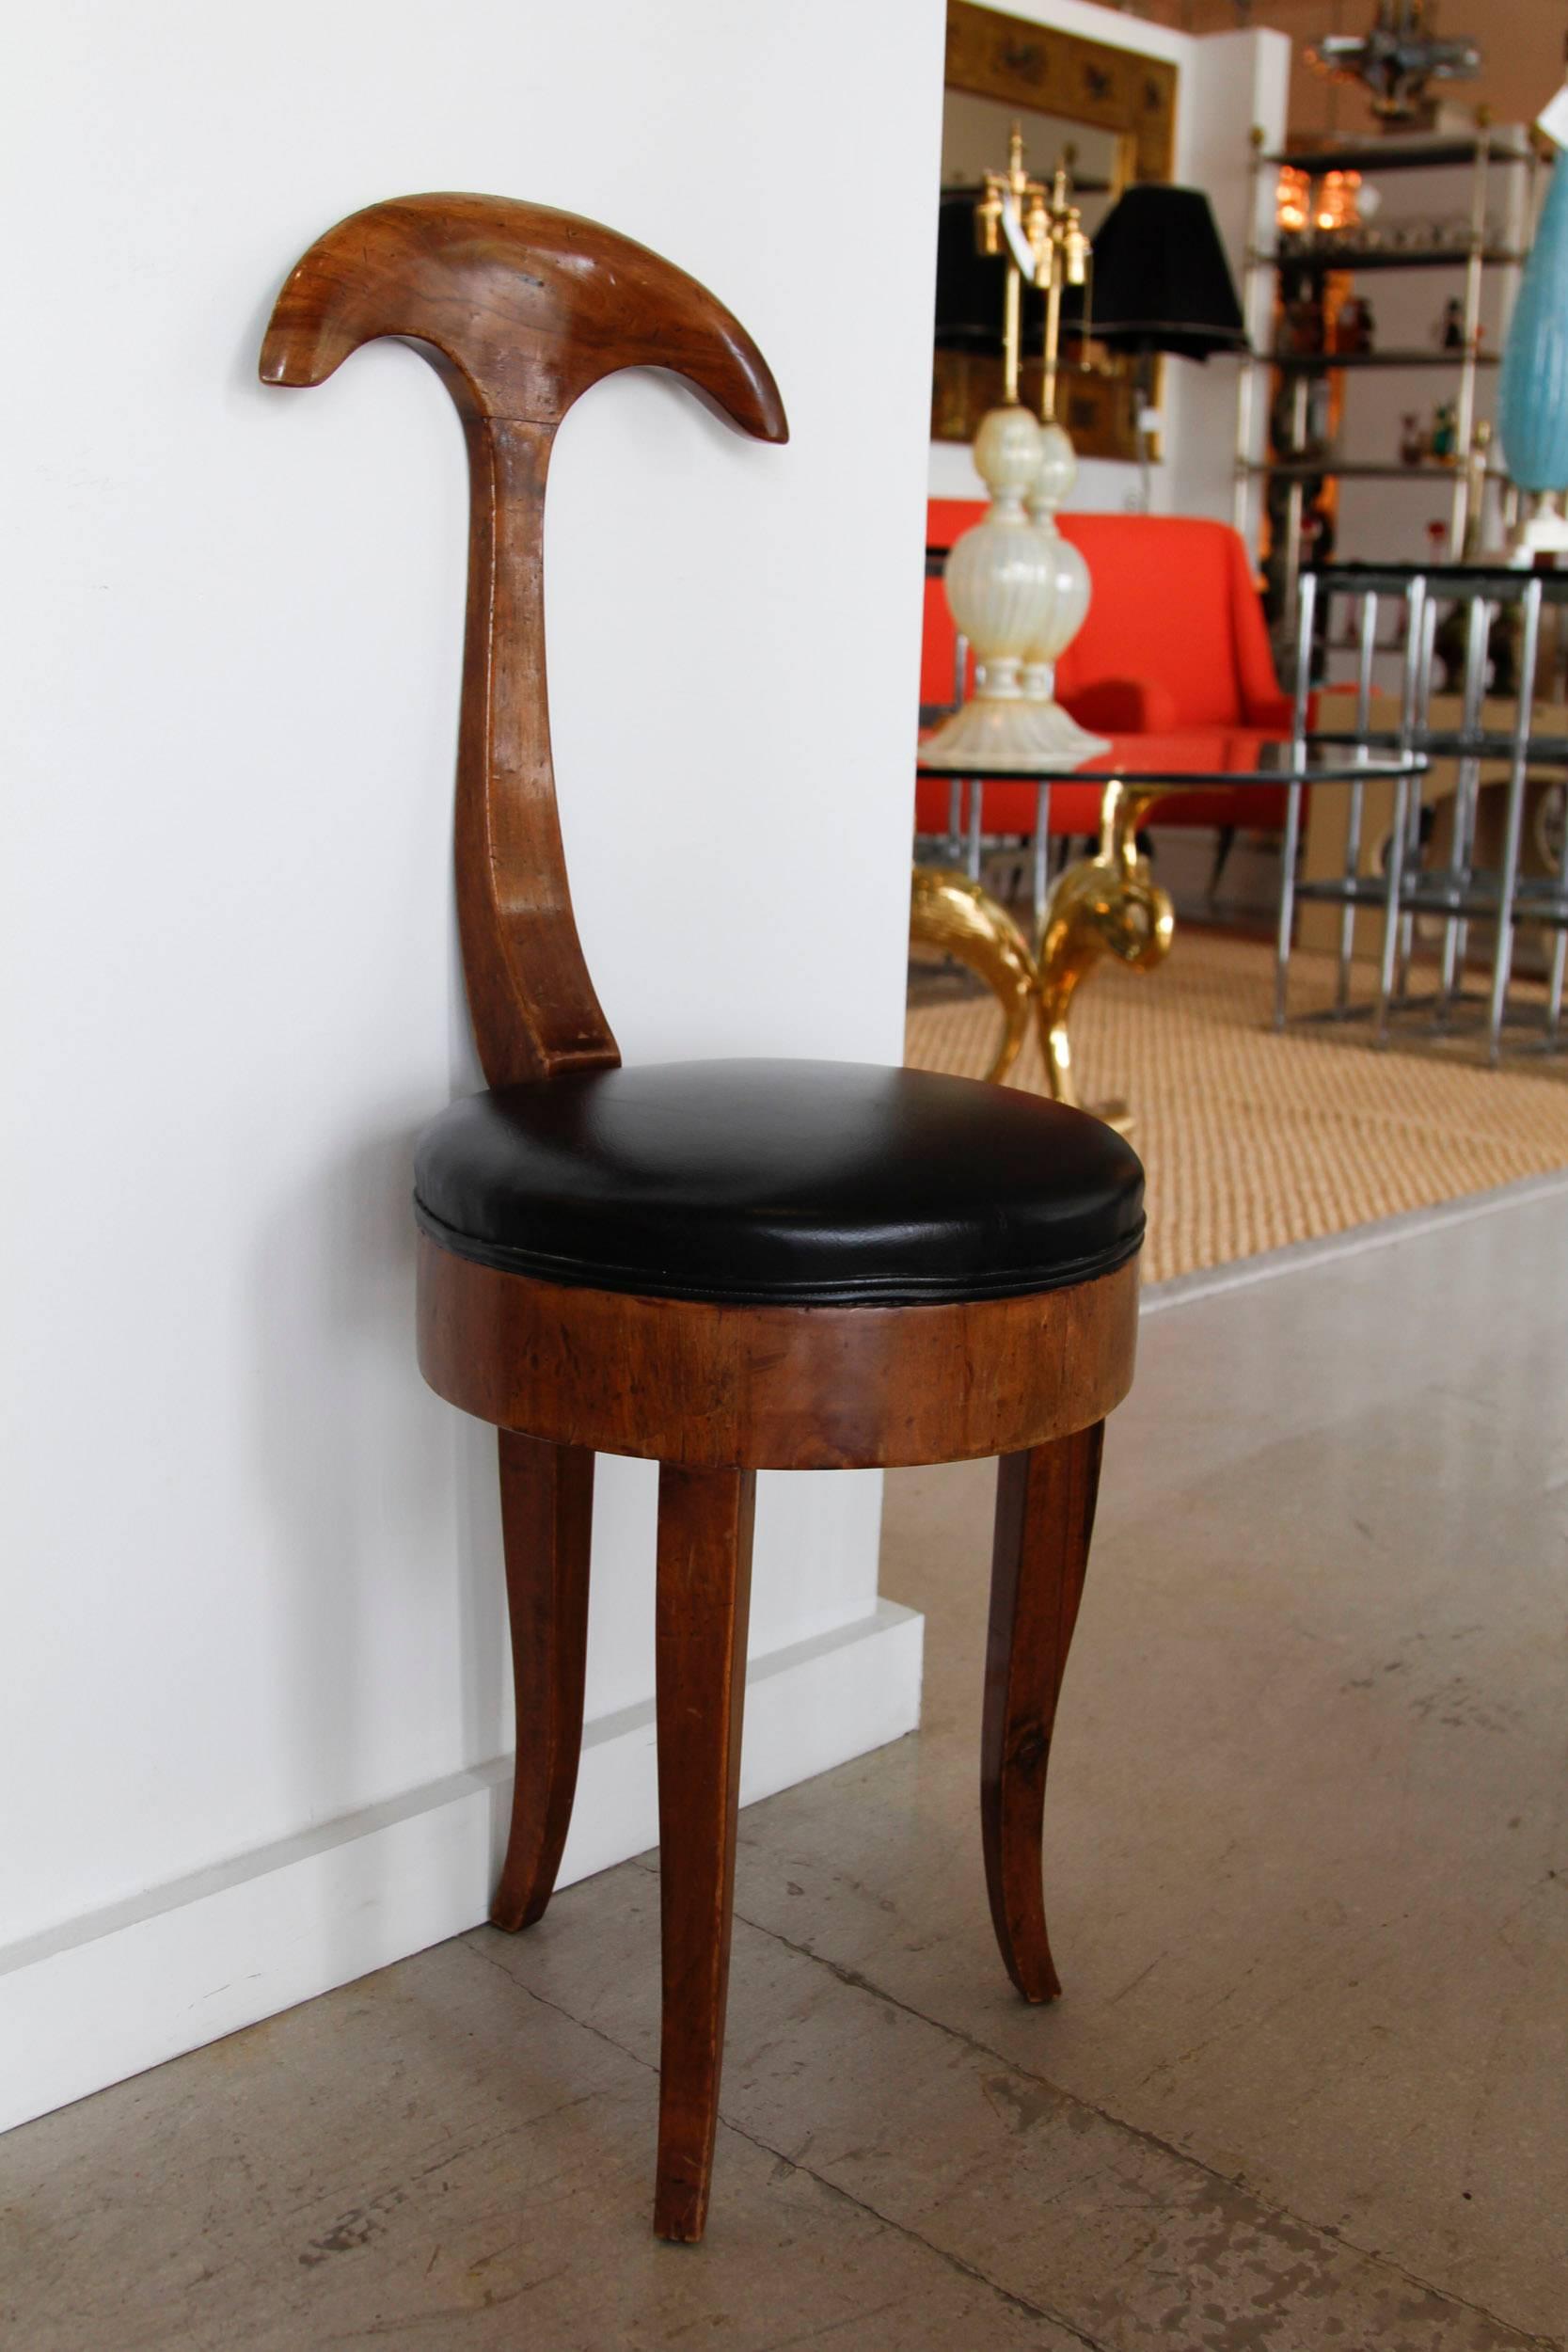 Whimsical Italian diminutive chair which may be placed in a multitude of vignettes.